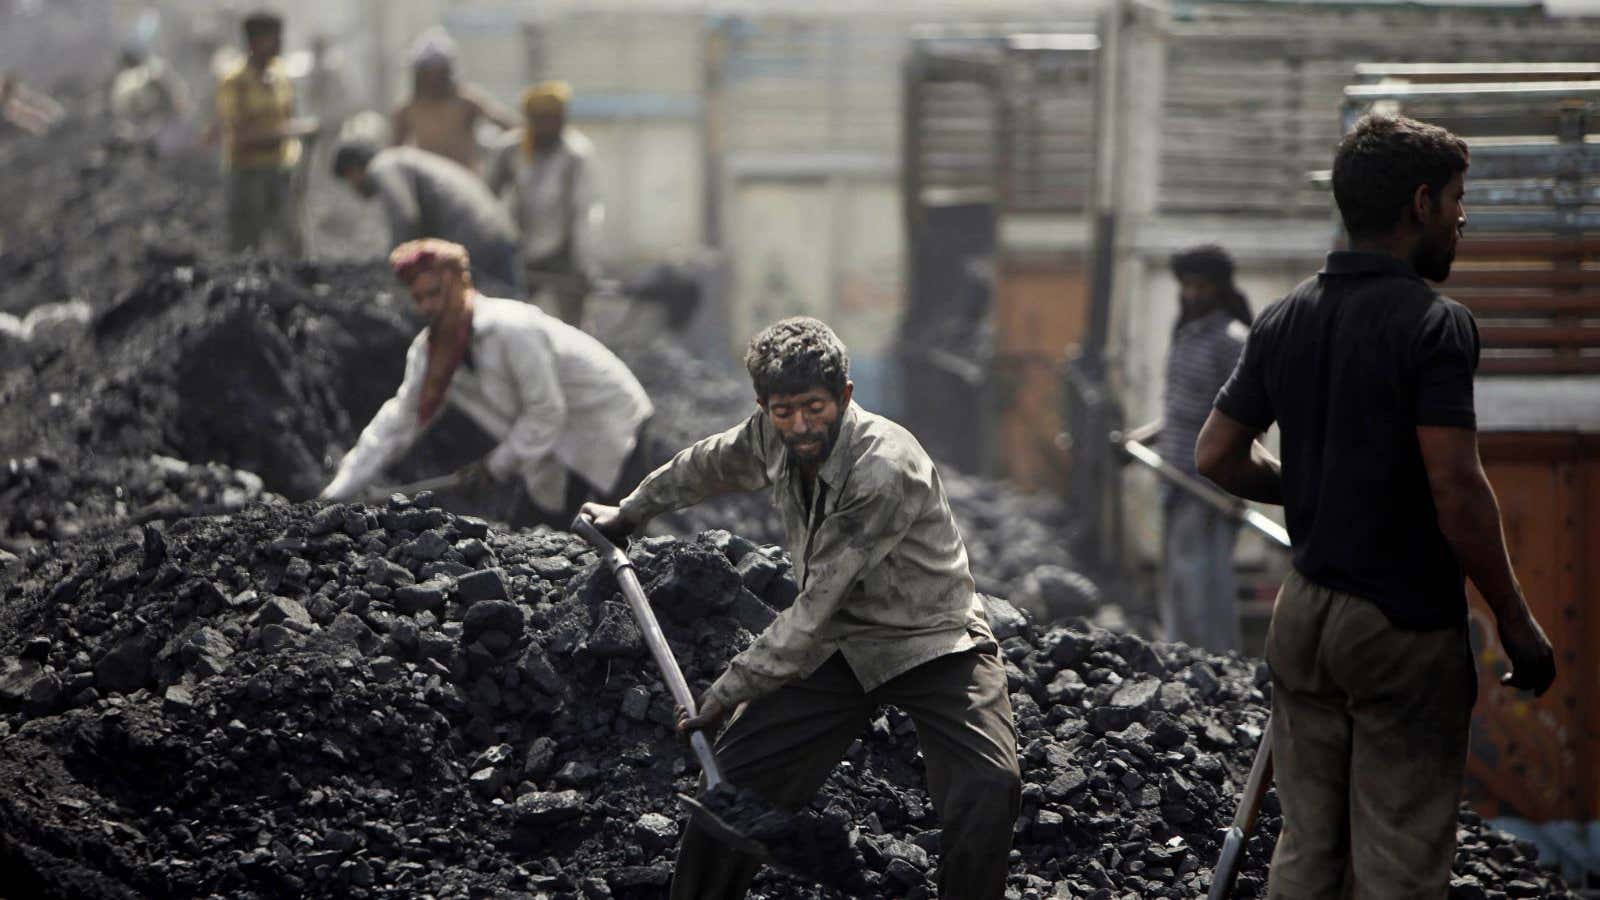 Work has stopped at over half of Coal India’s production units.